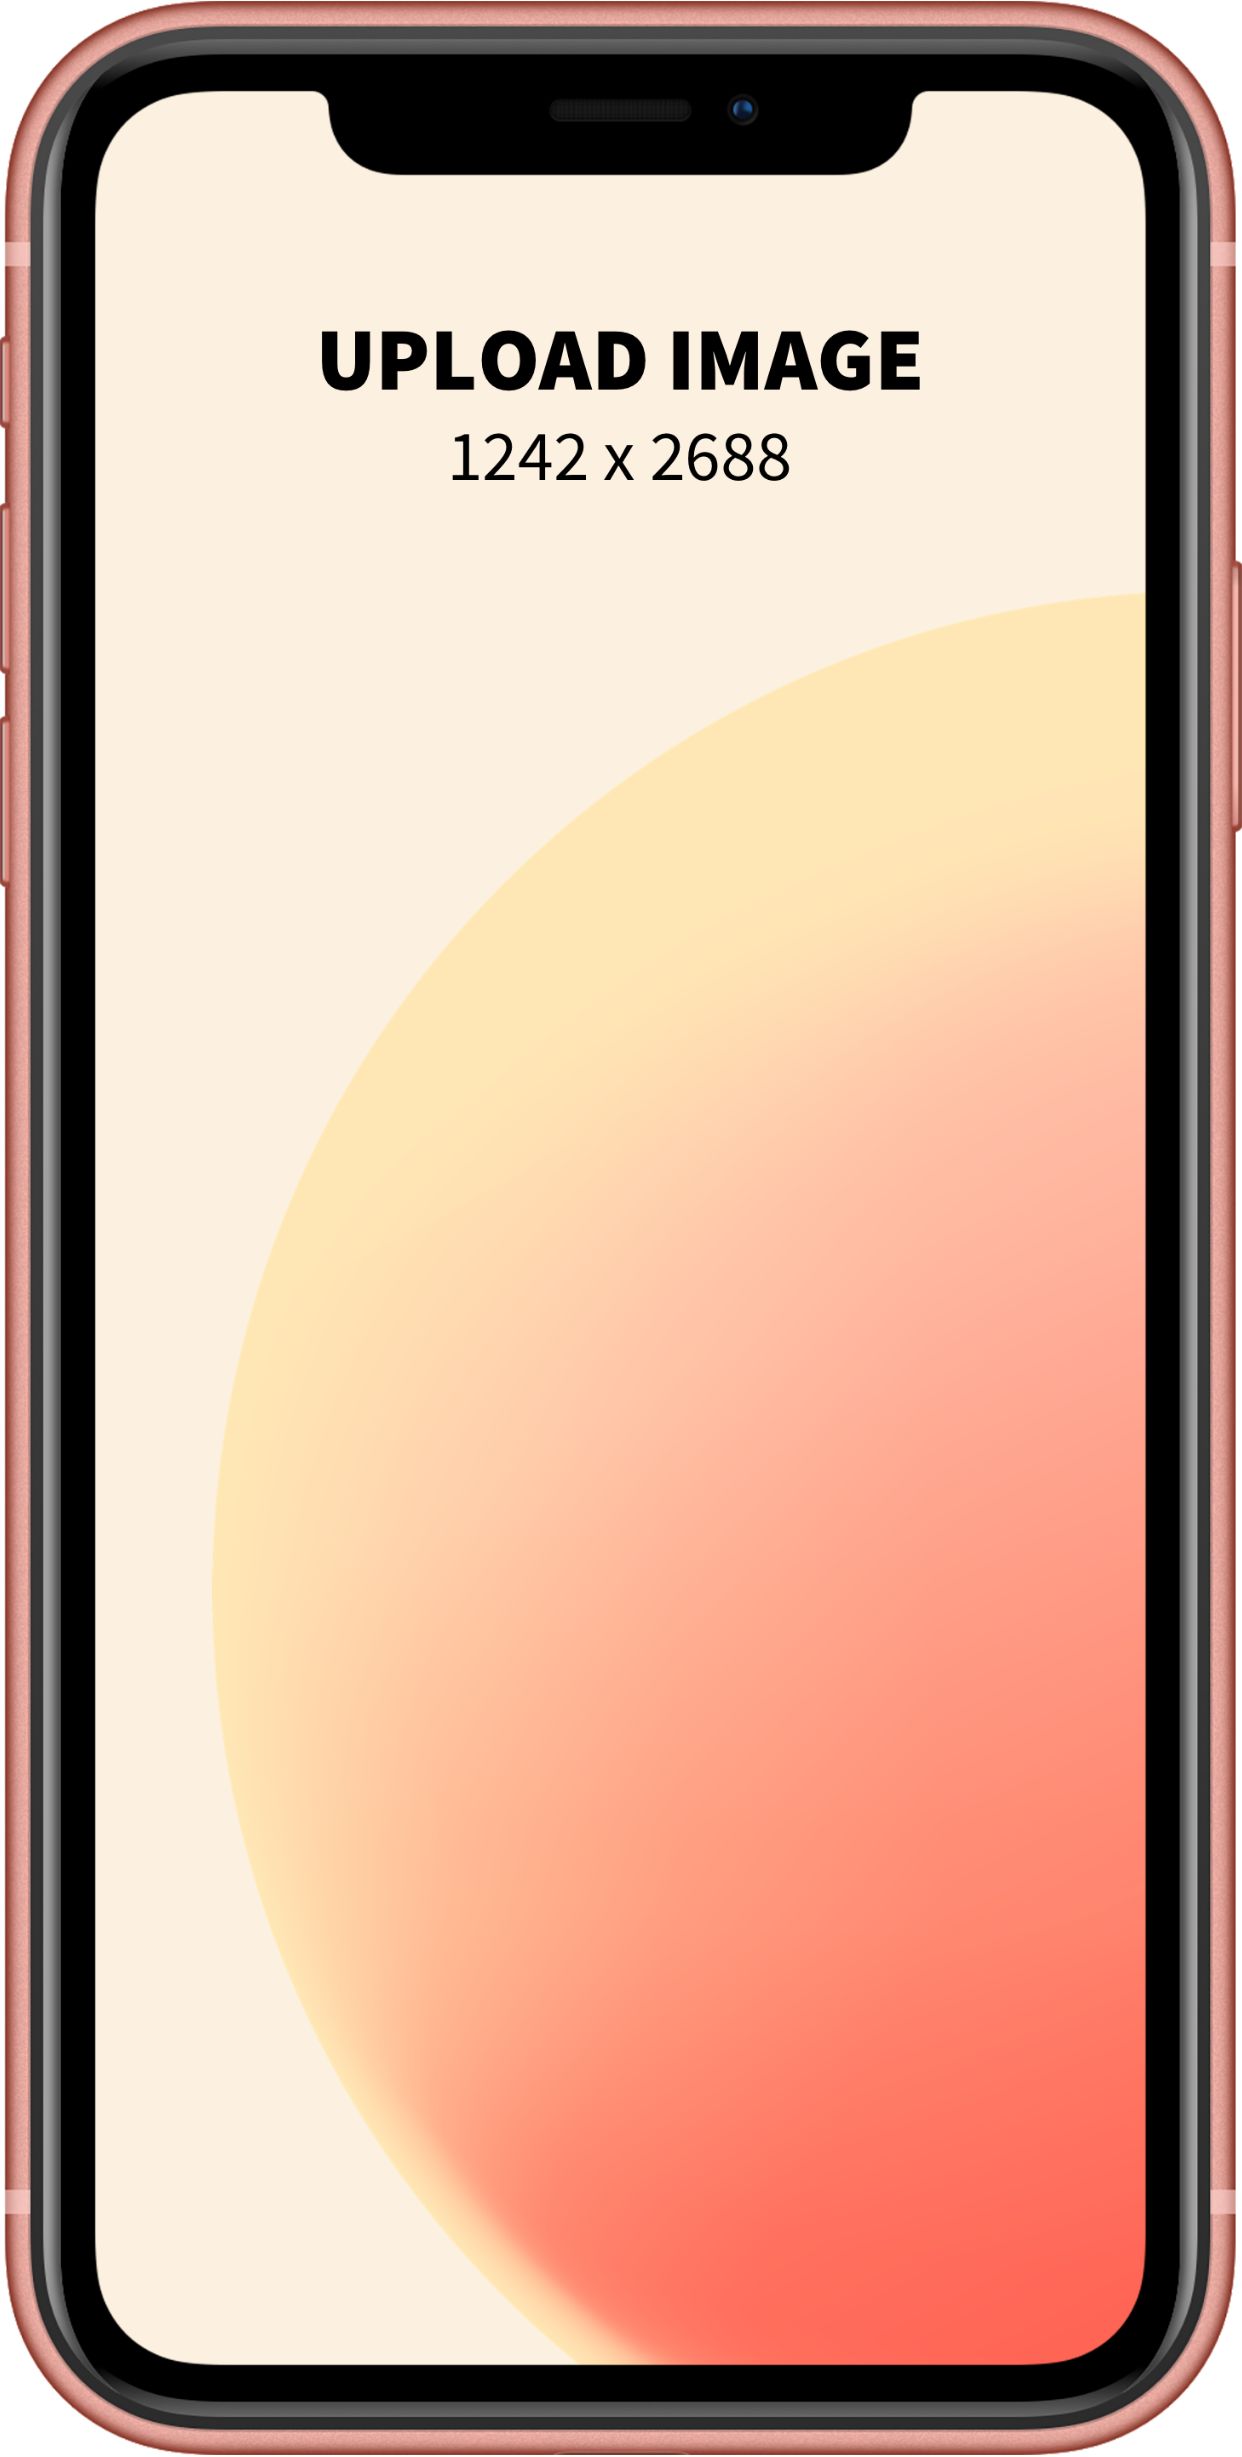 iPhone XS Max Mockup 6 template. Quickly edit fonts, text, colors, and more for free.